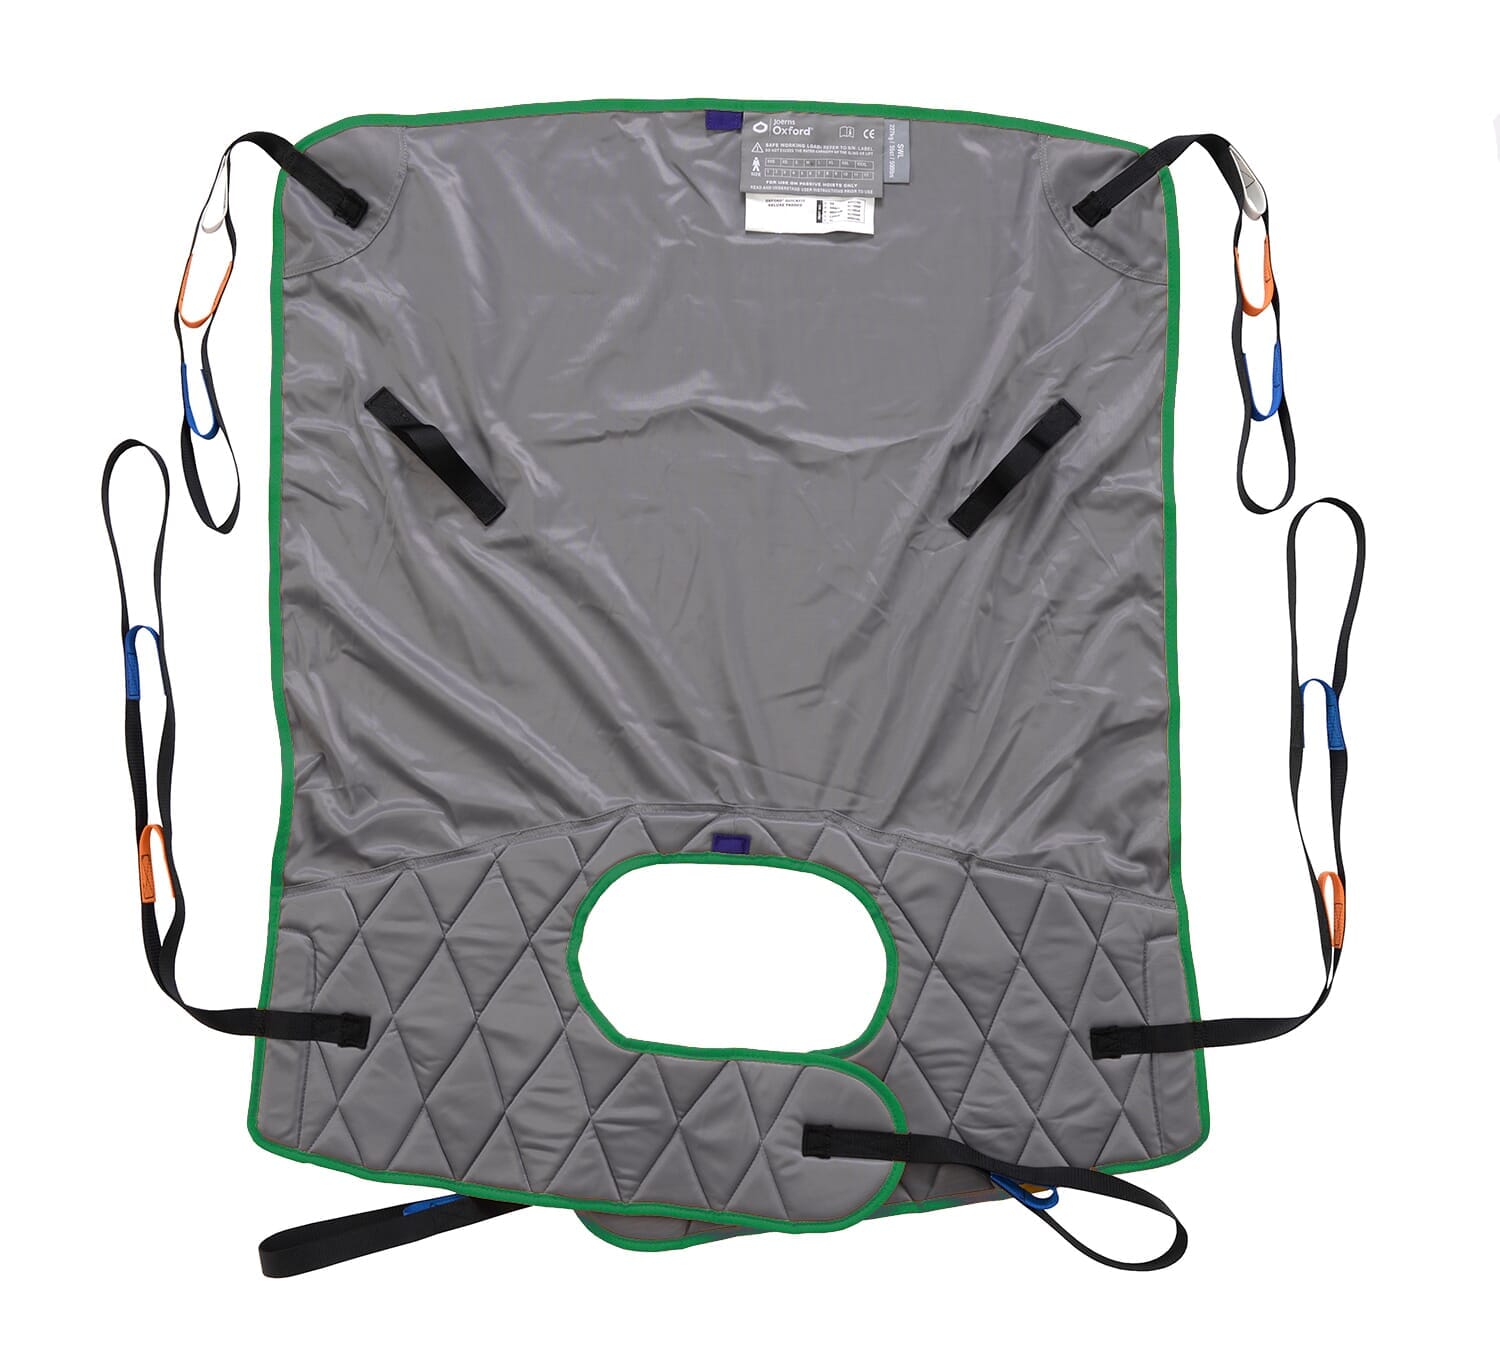 View Oxford Quickfit Deluxe Sling Large with Padded Legs information